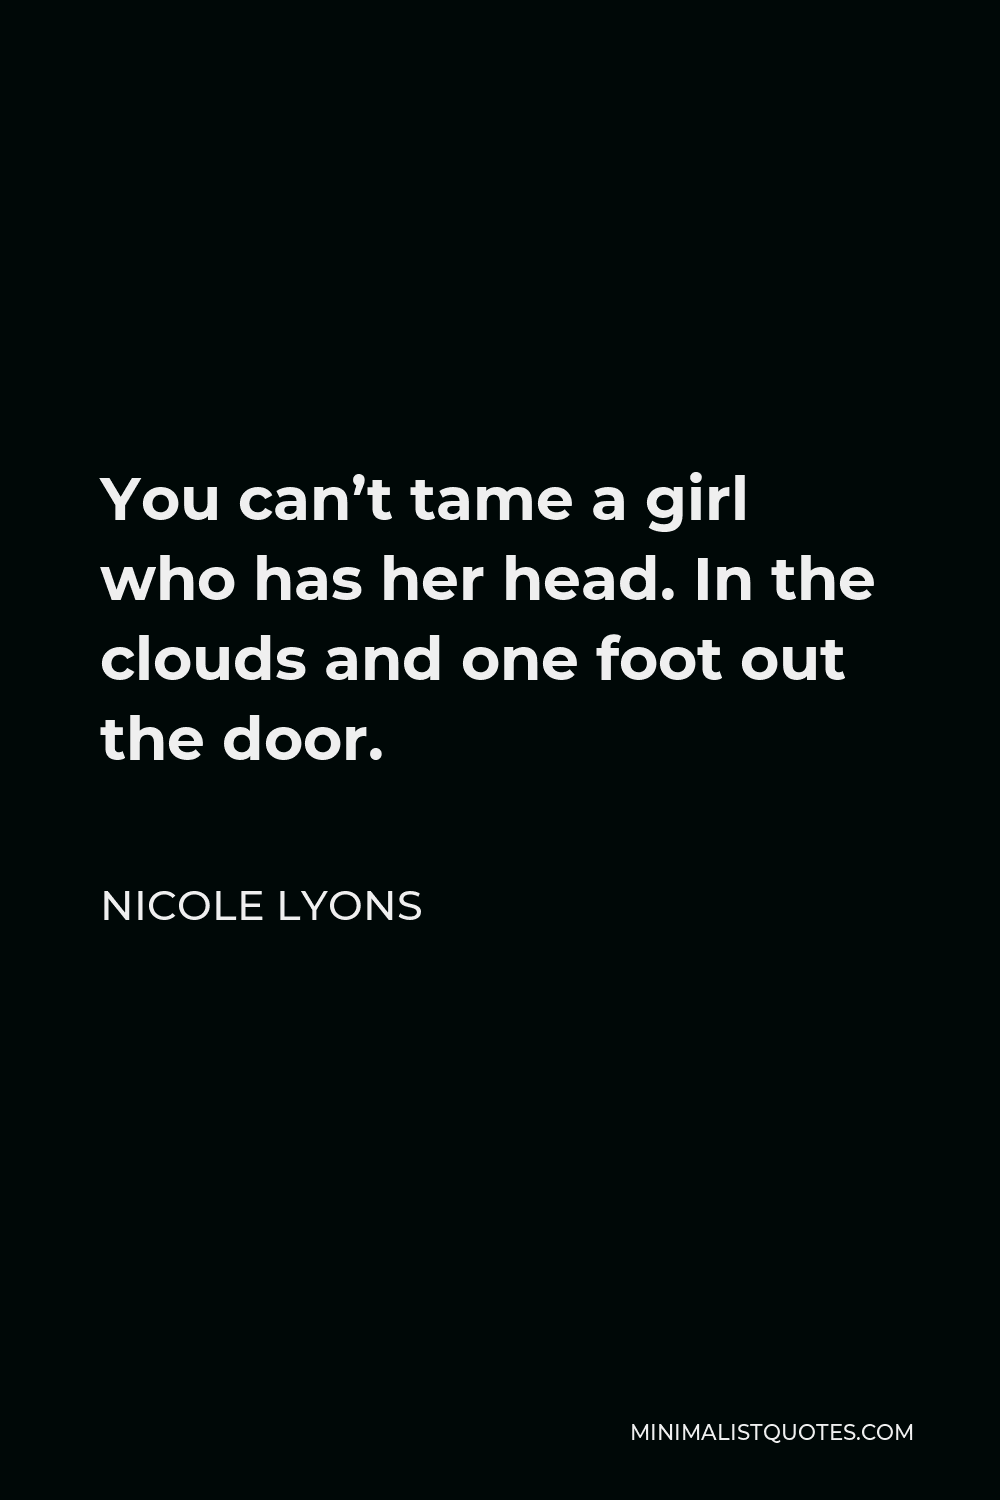 Nicole Lyons Quote - You can’t tame a girl who has her head. In the clouds and one foot out the door.